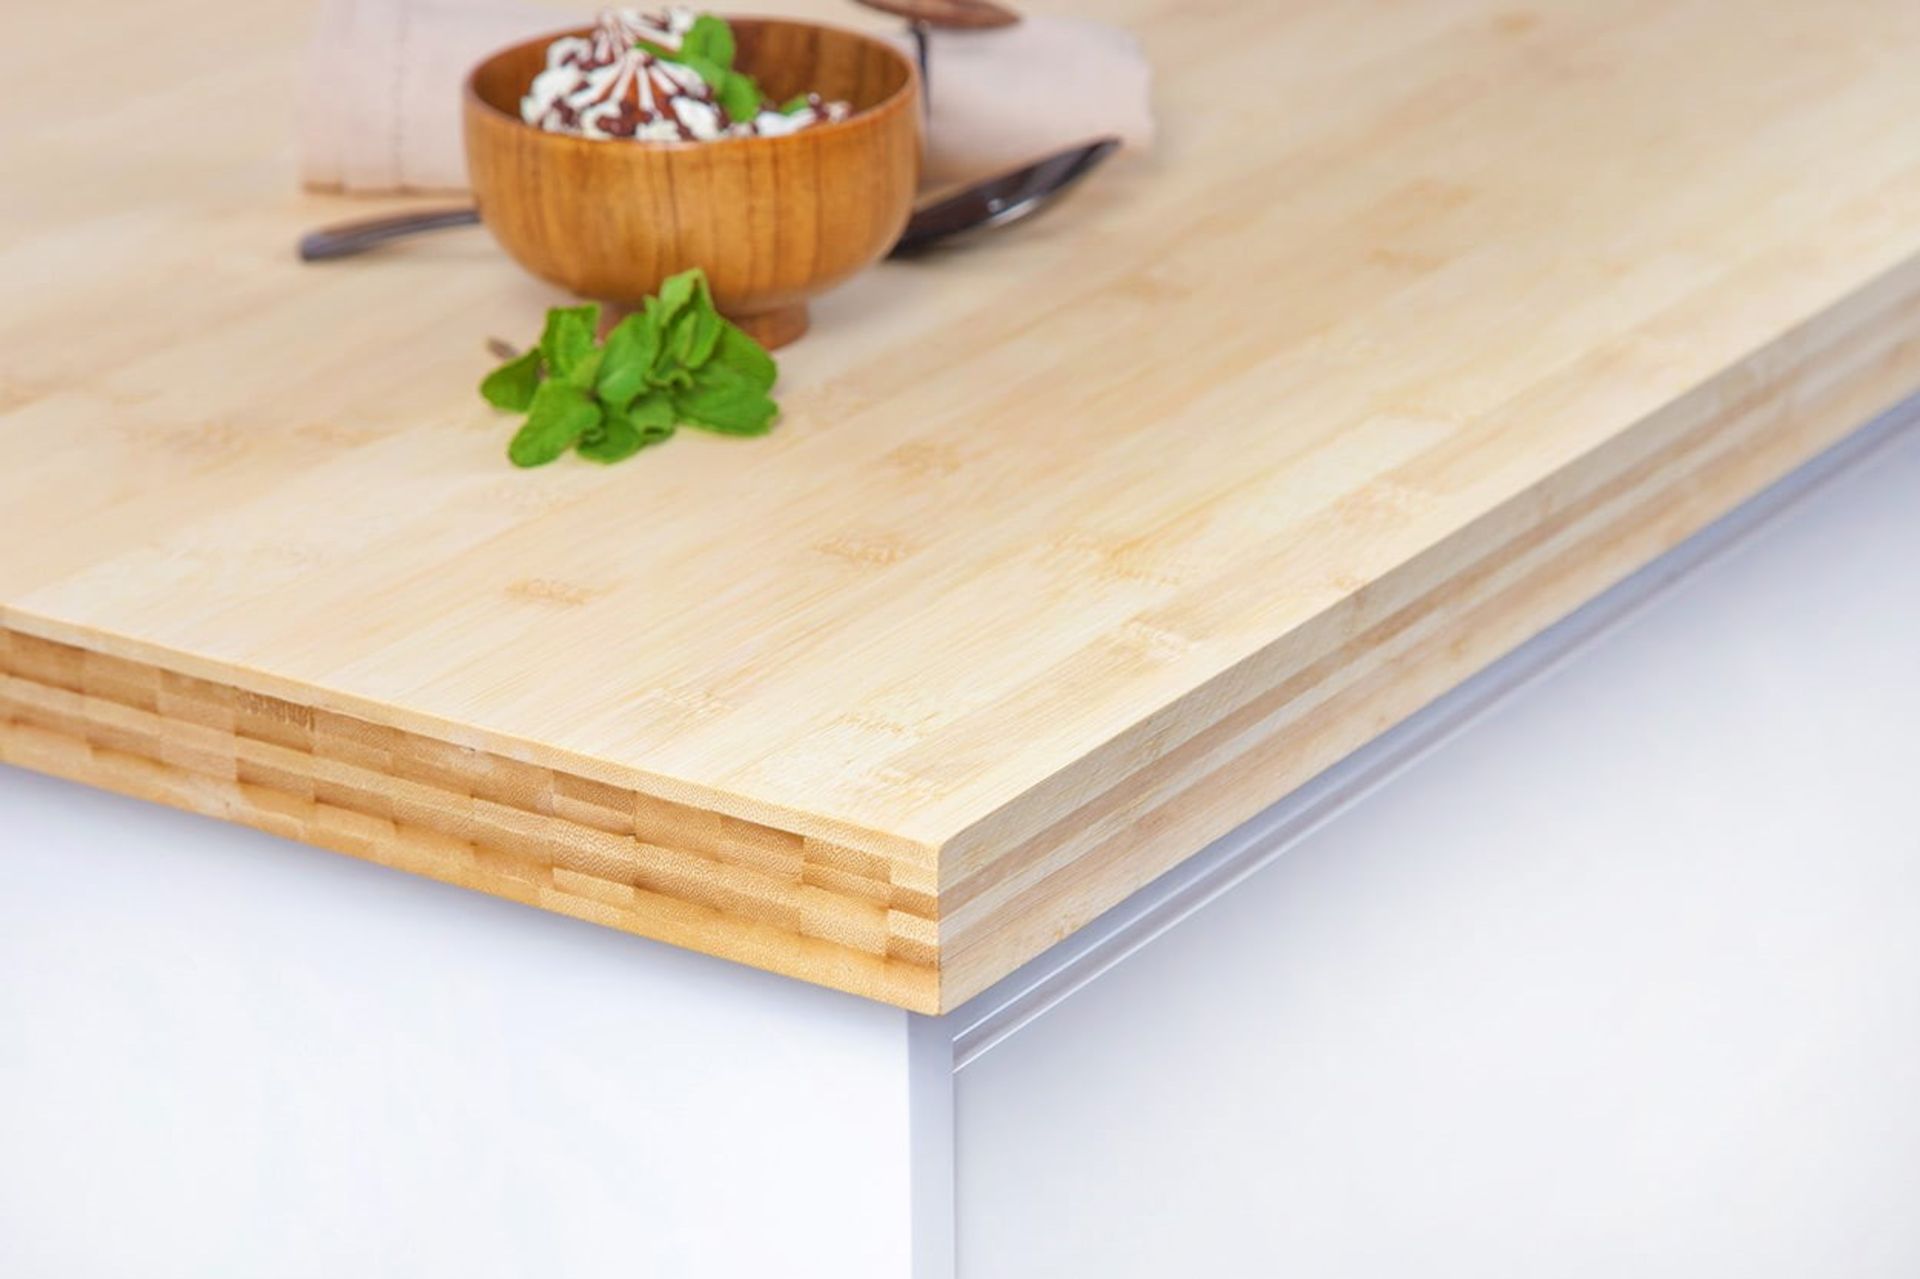 1 x Layered Solid Bamboo Wood Worktop - Size: 3000 x 900 x 40mm - Ideal For Kitchens, Countertops, - Image 4 of 5